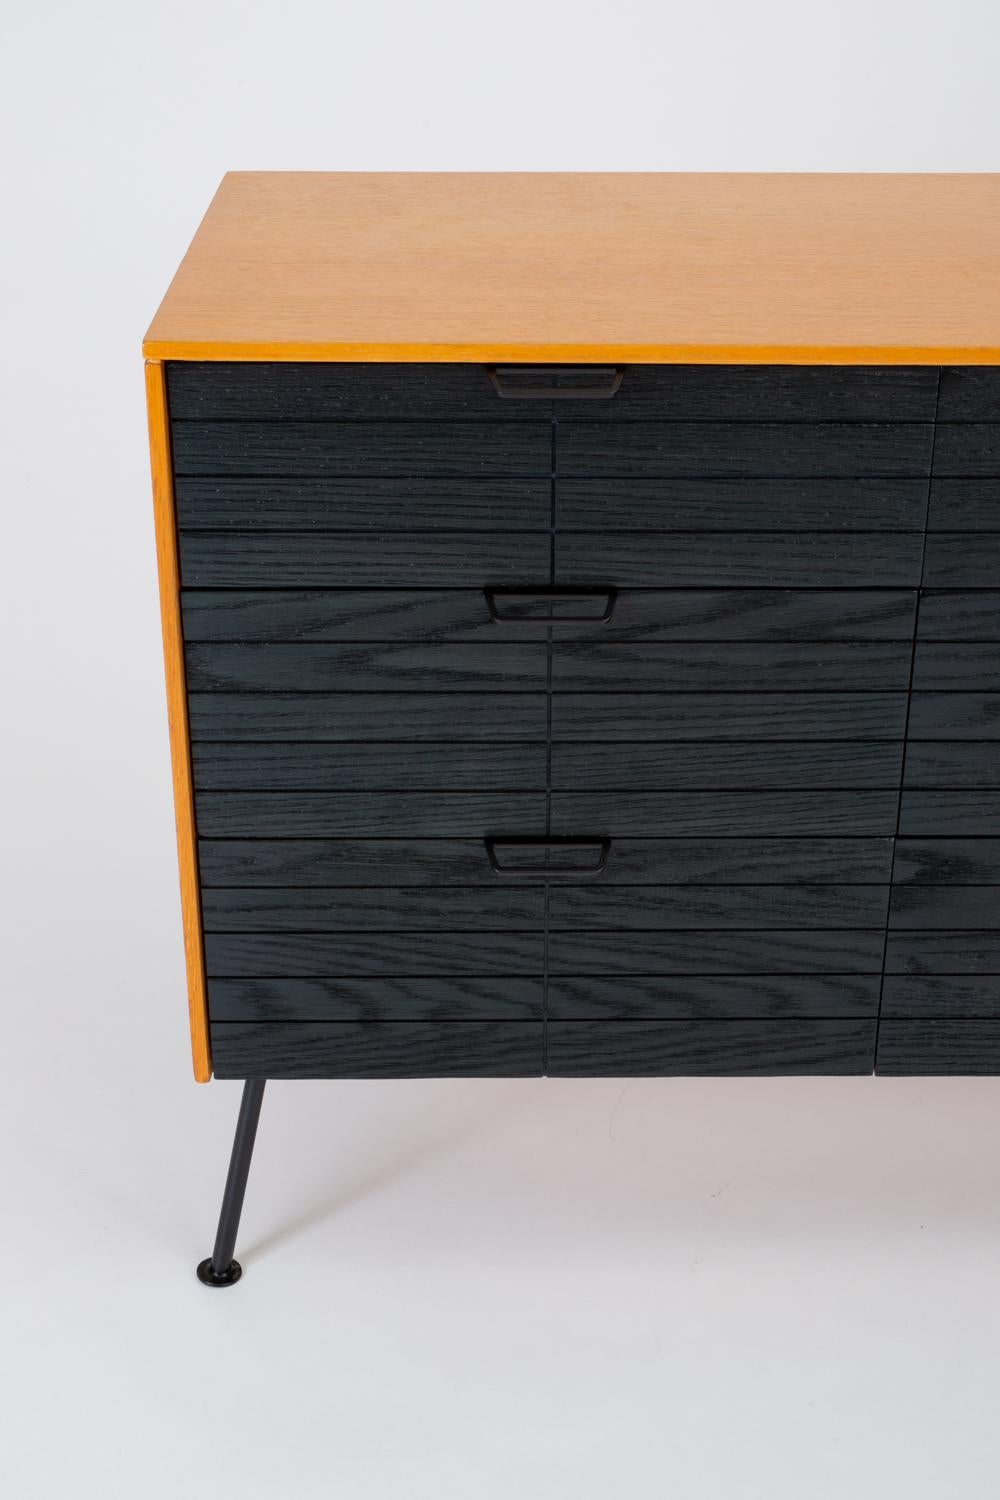 Mid-20th Century Nine-Drawer Dresser from Raymond Loewy’s “Accent” Line for the Mengel Company